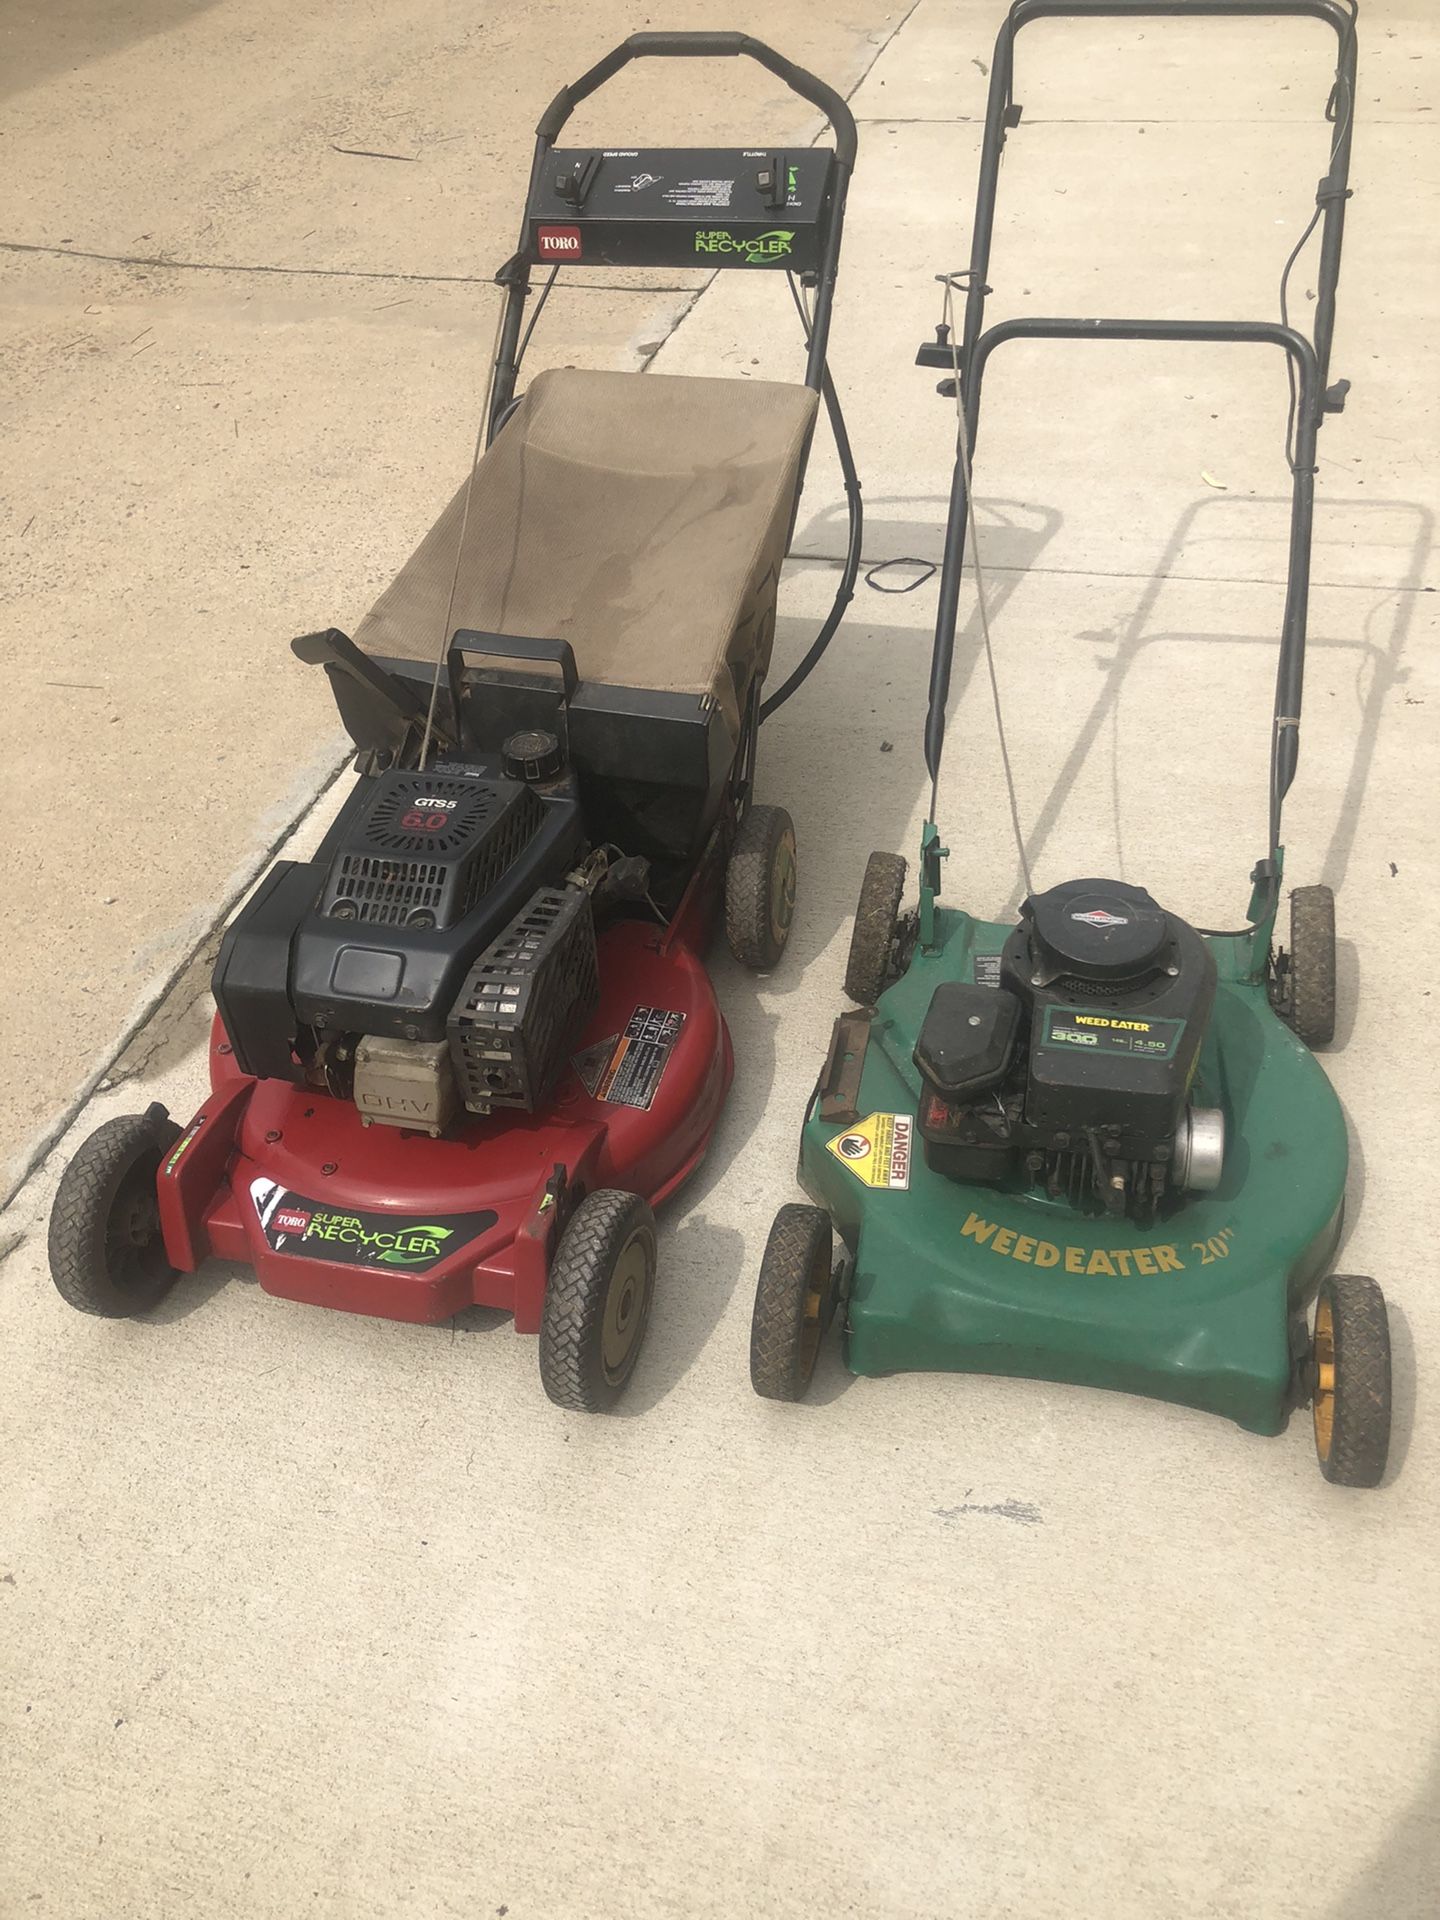 Mowers 2 for sale.